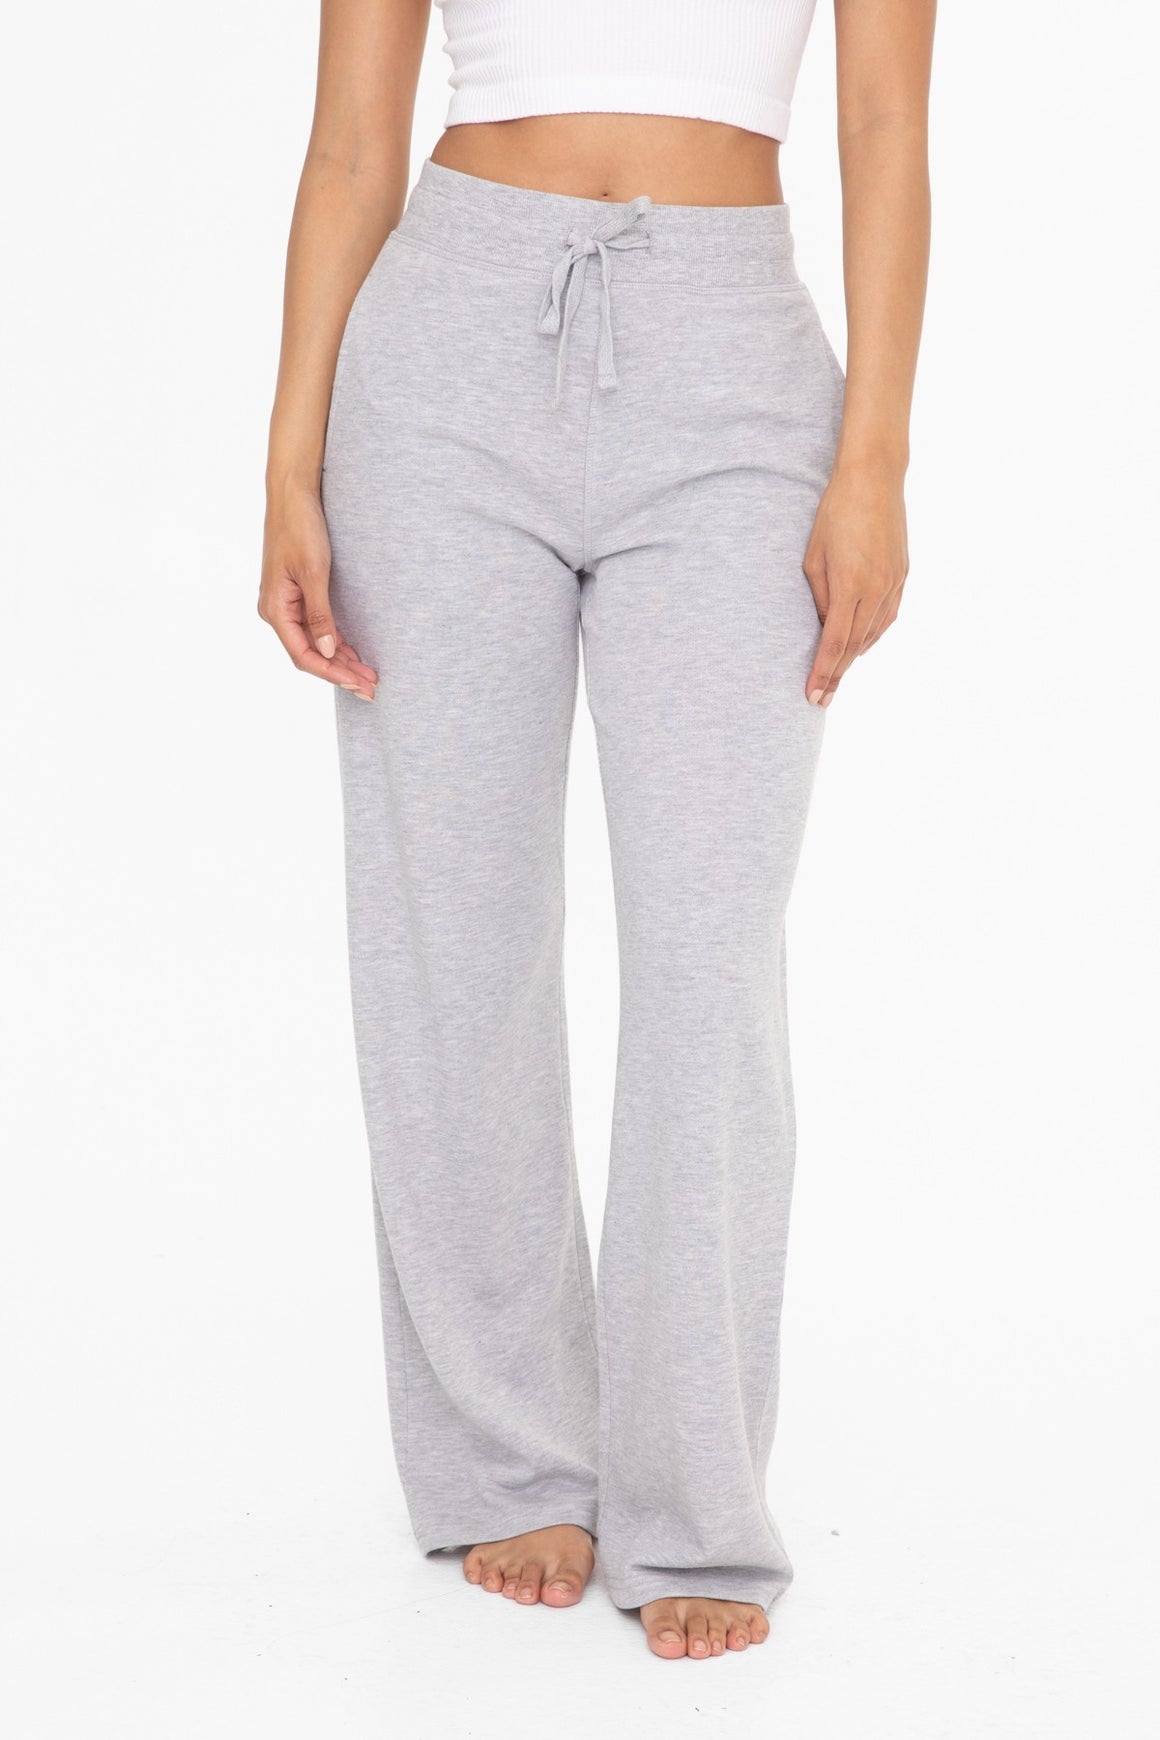 Julha French Terry Sweatpants